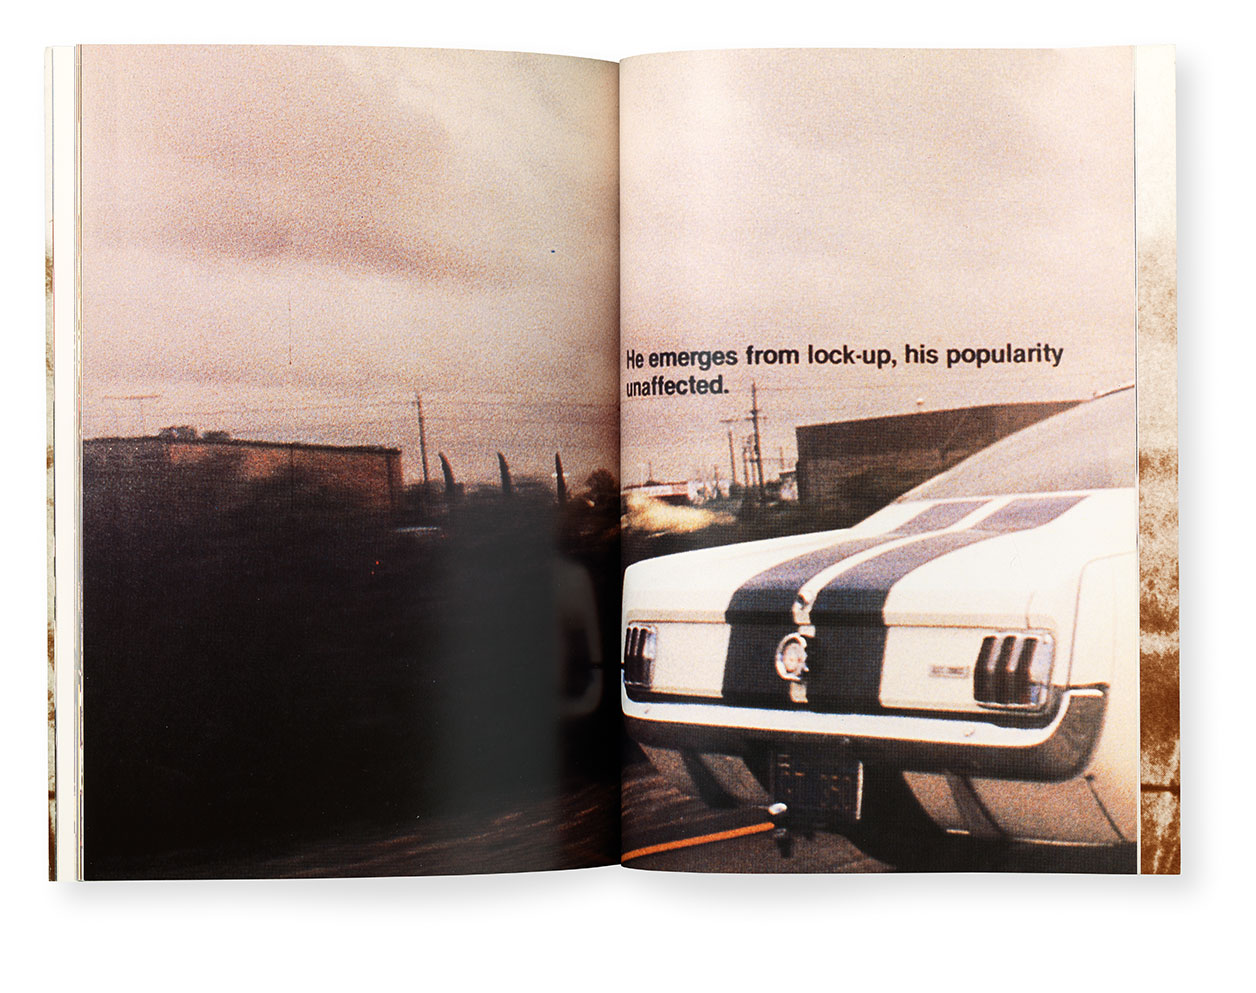 A spread from Richard Prince (1988) by Richard Prince, as reproduced in Artists Who Make Books